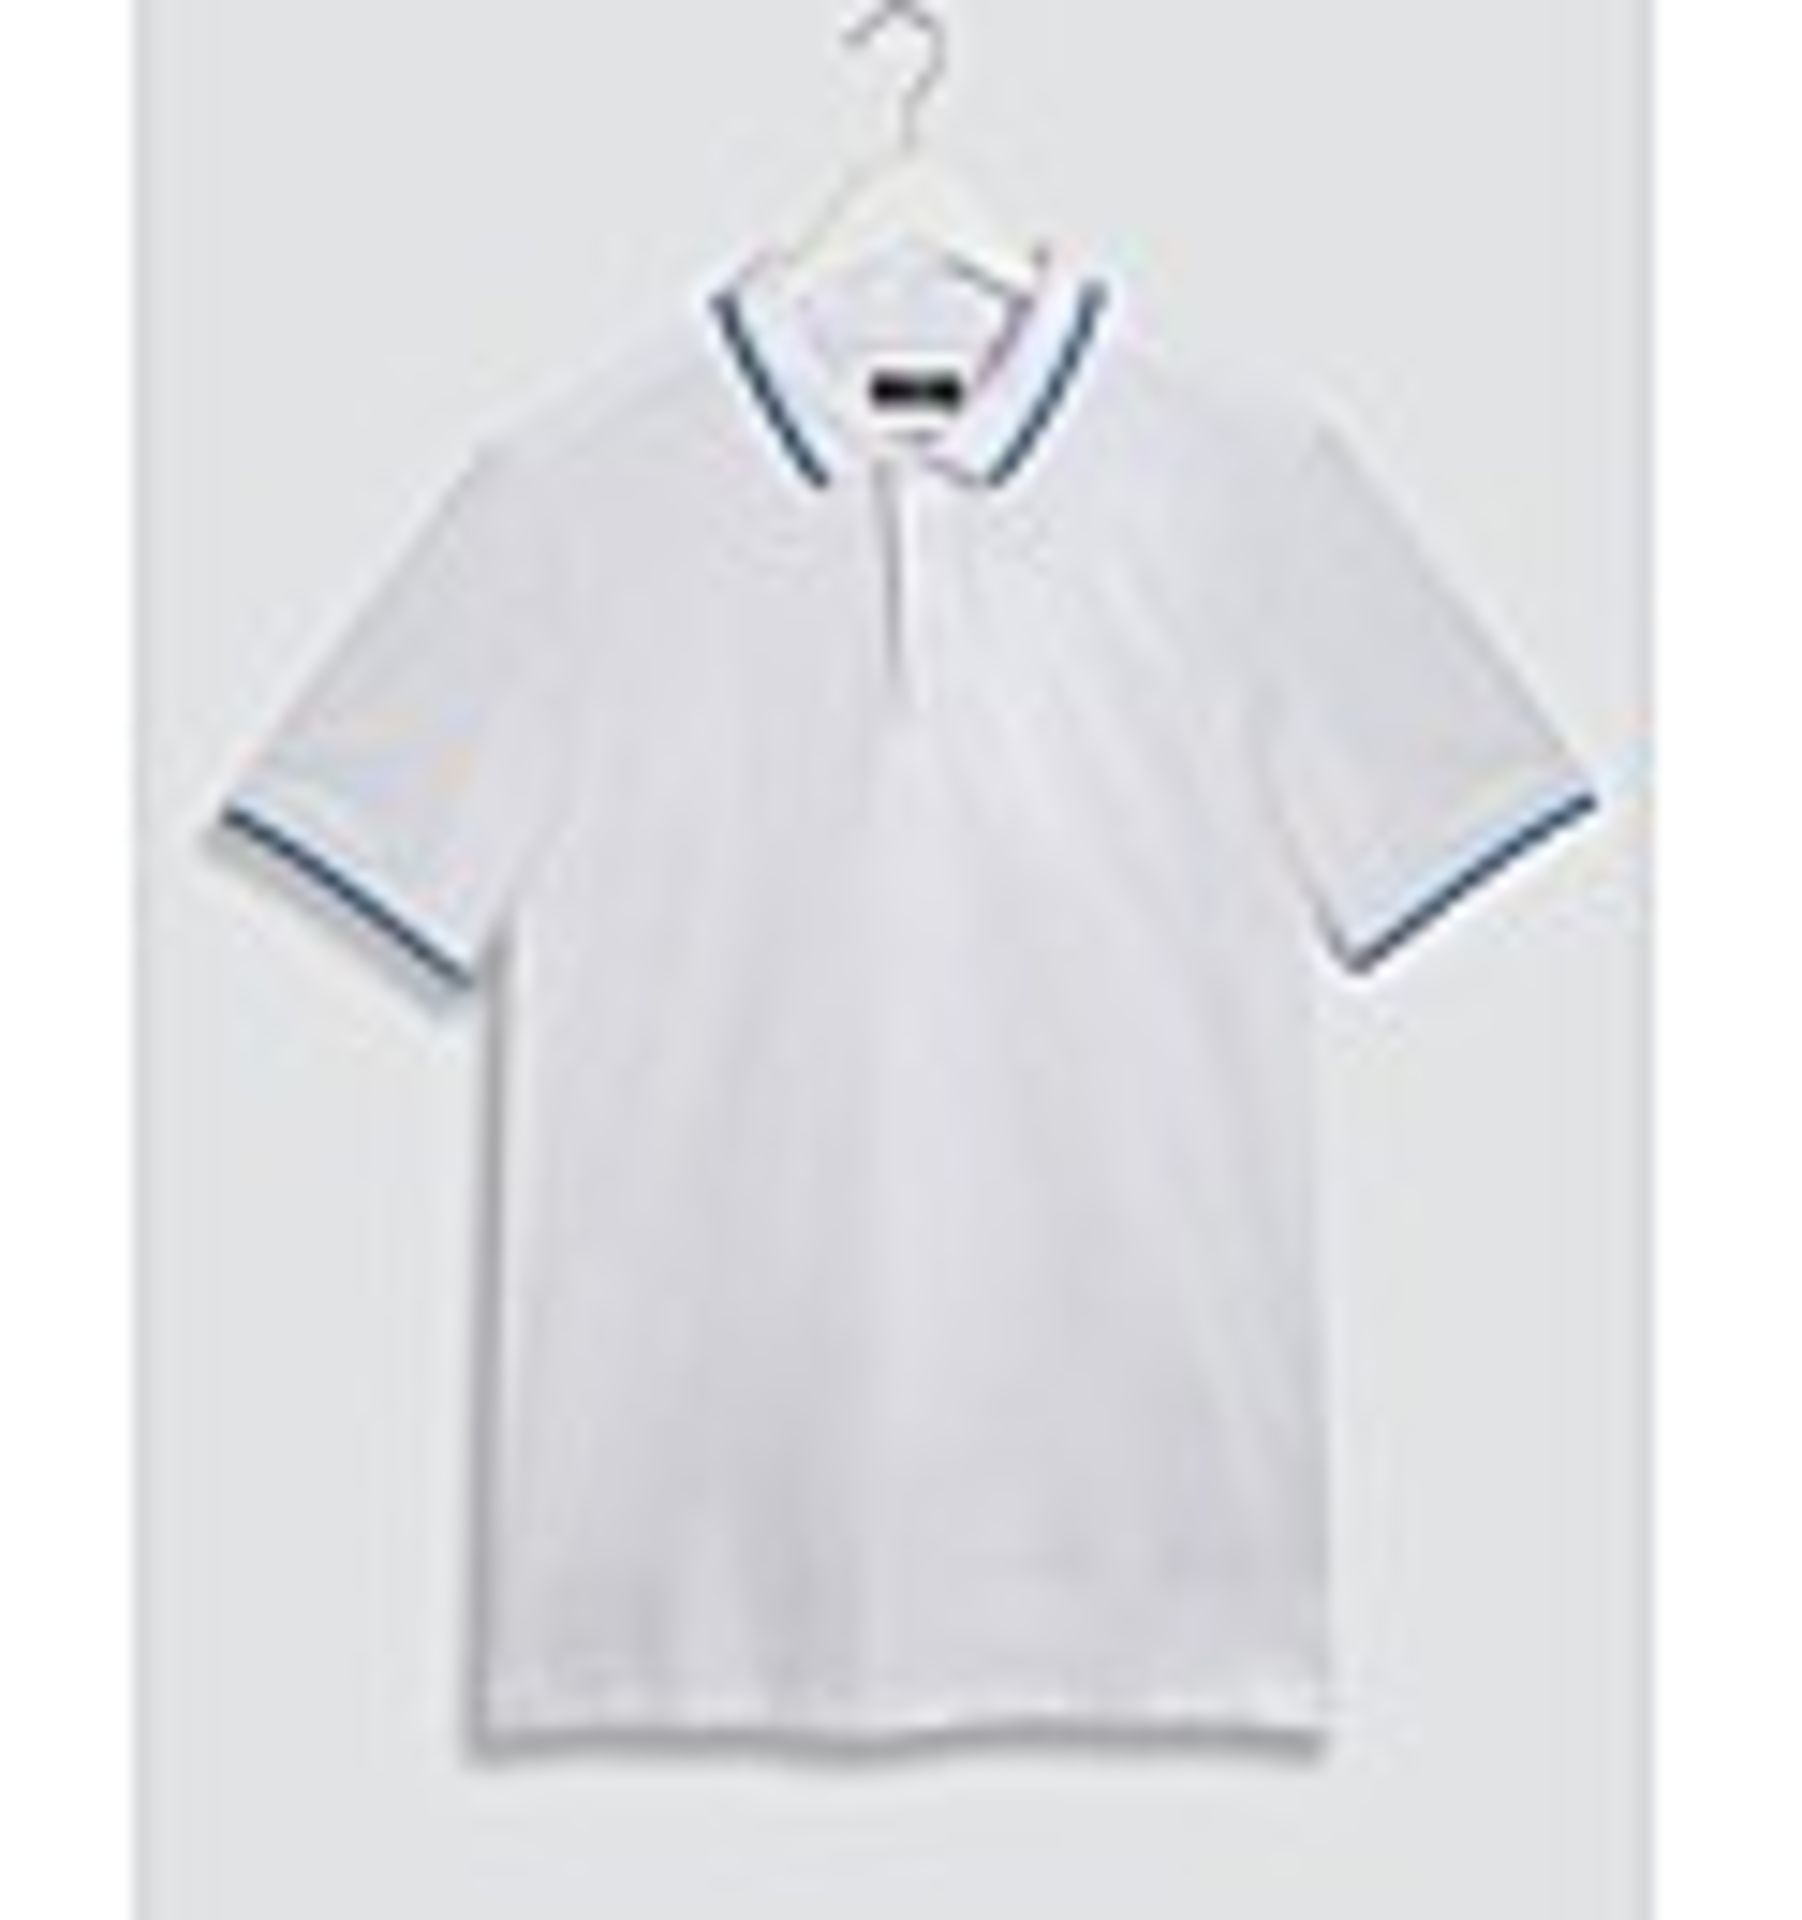 BRAND NEW STRECH TIPPED POLO SIZE SMALL RRP £16 Condition ReportBRAND NEW